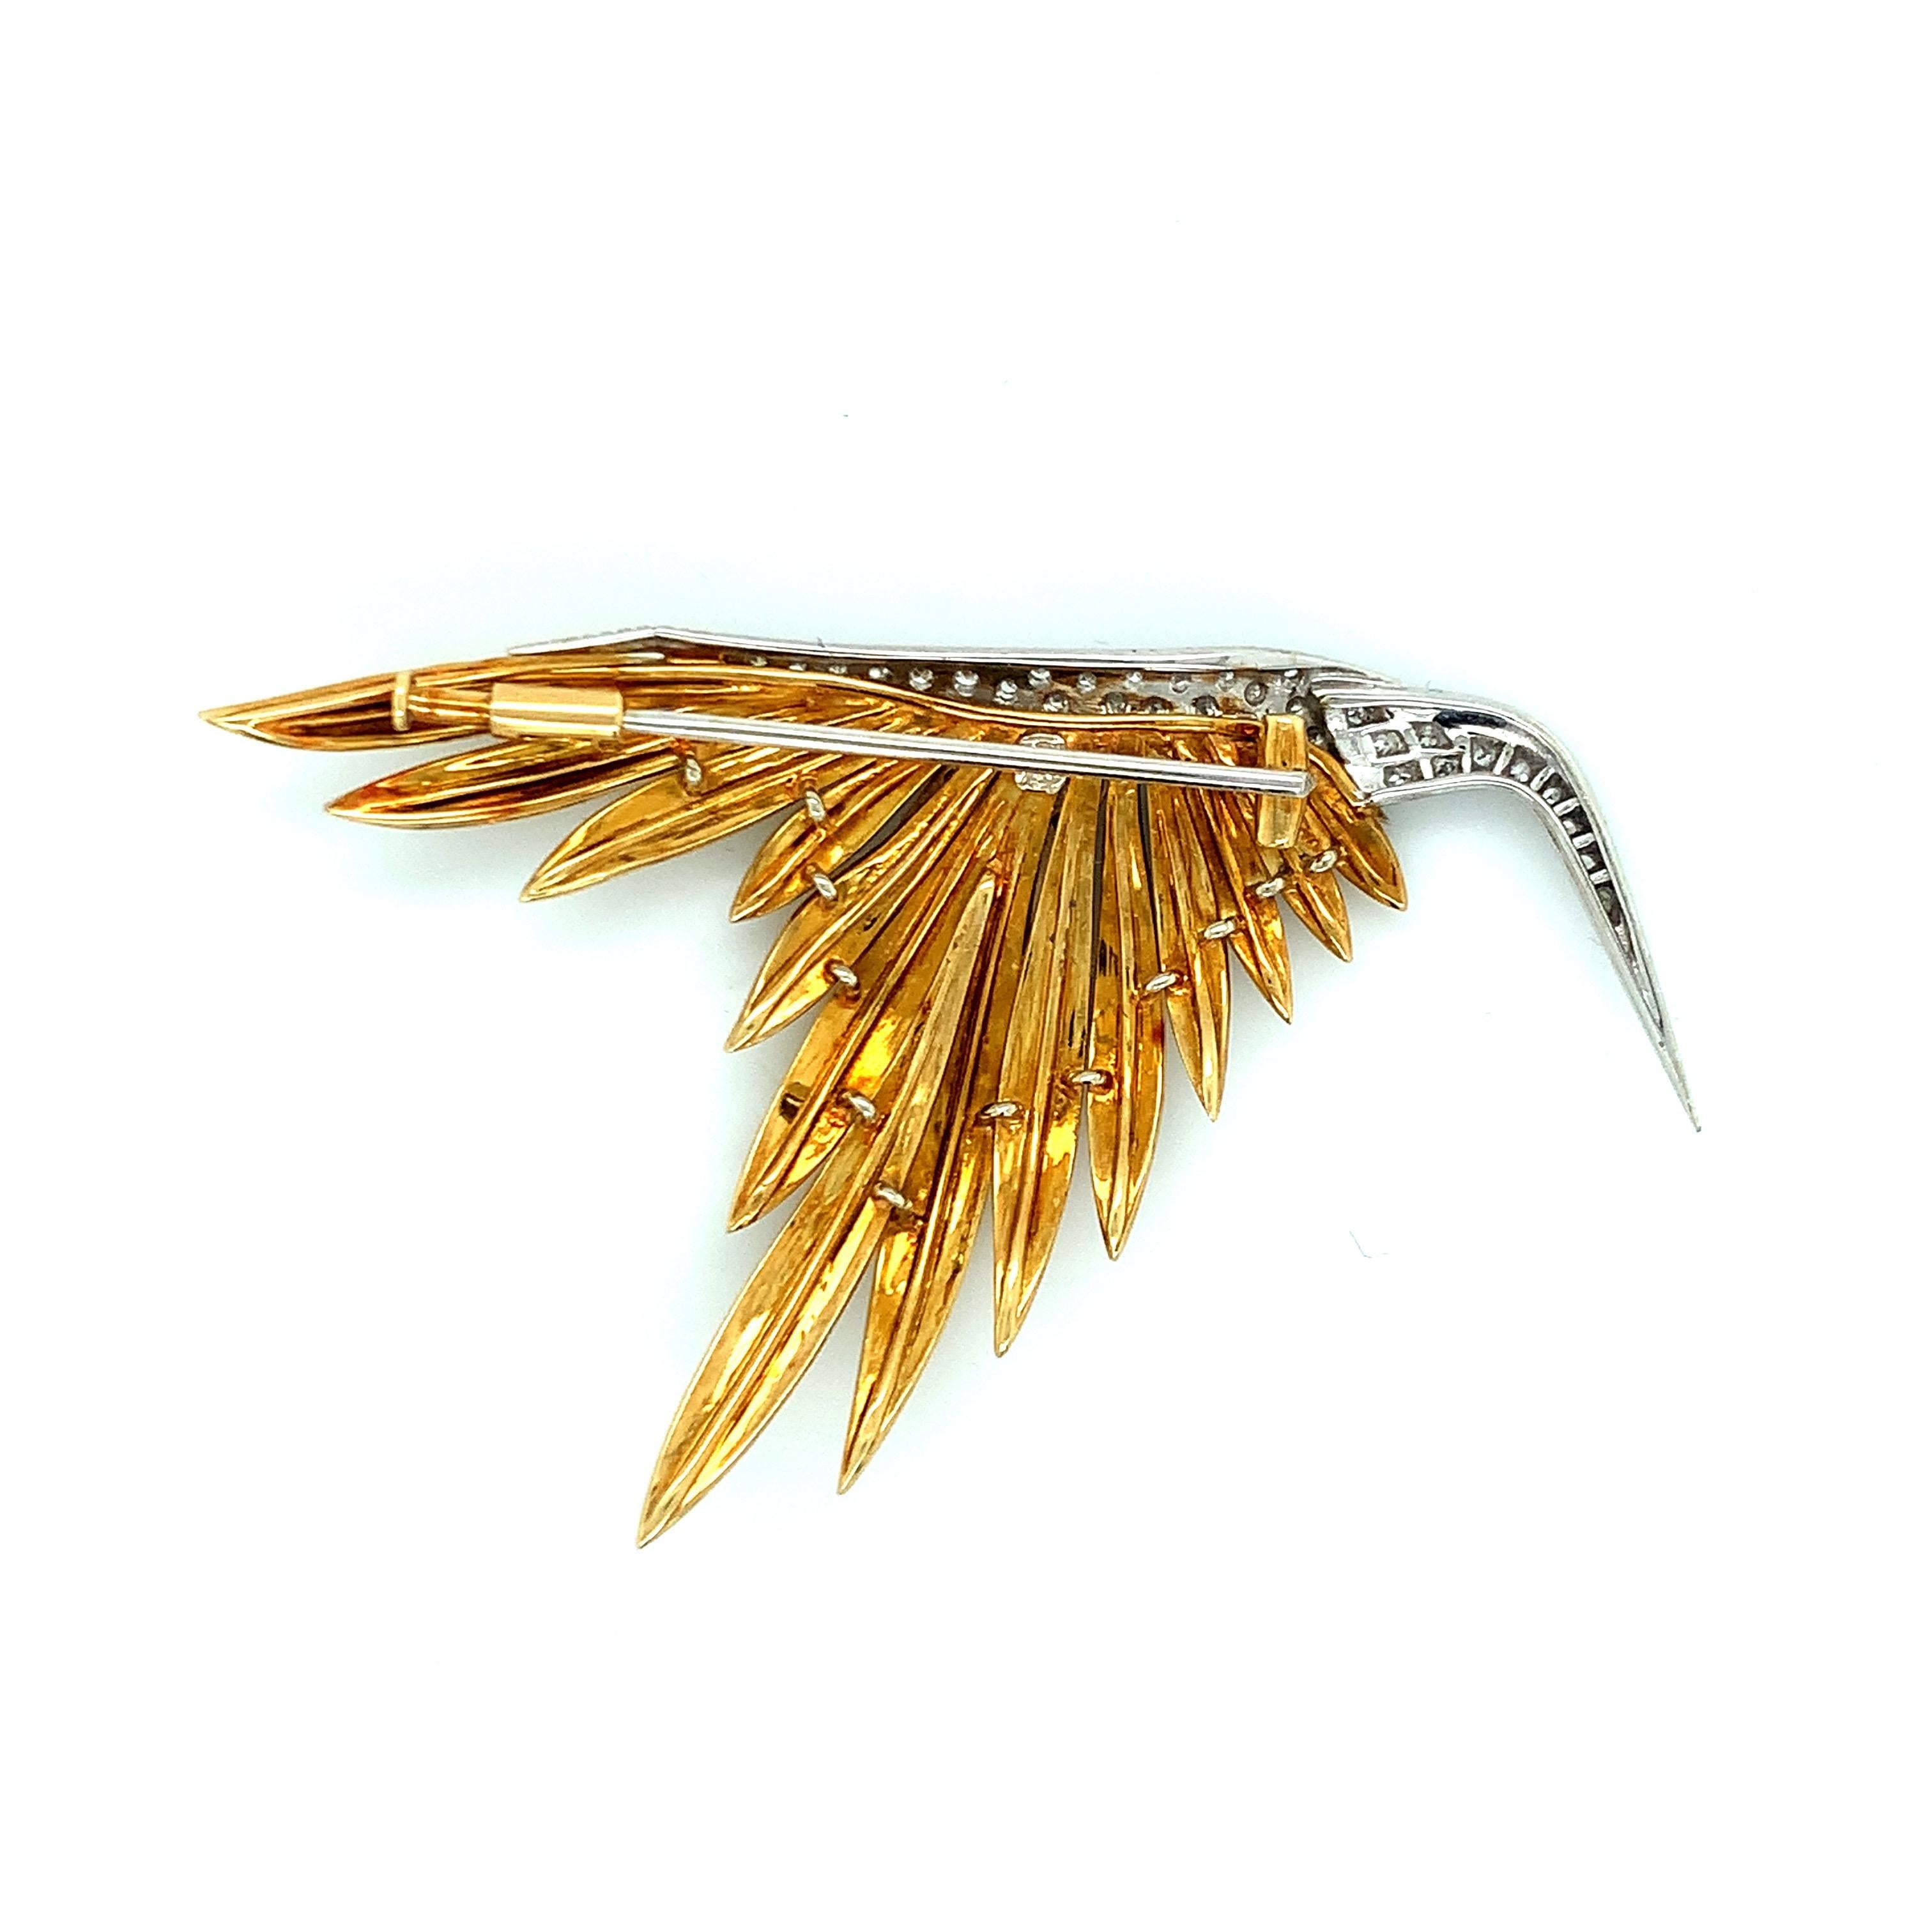 This yellow gold brooch features an abstract figure of a bird in mid-flight. Although the bird is depicted in round diamonds, the attention falls on the beauty of its striking golden feathers. Possibly created by Pierre Sterlé. Total weight: 14.8